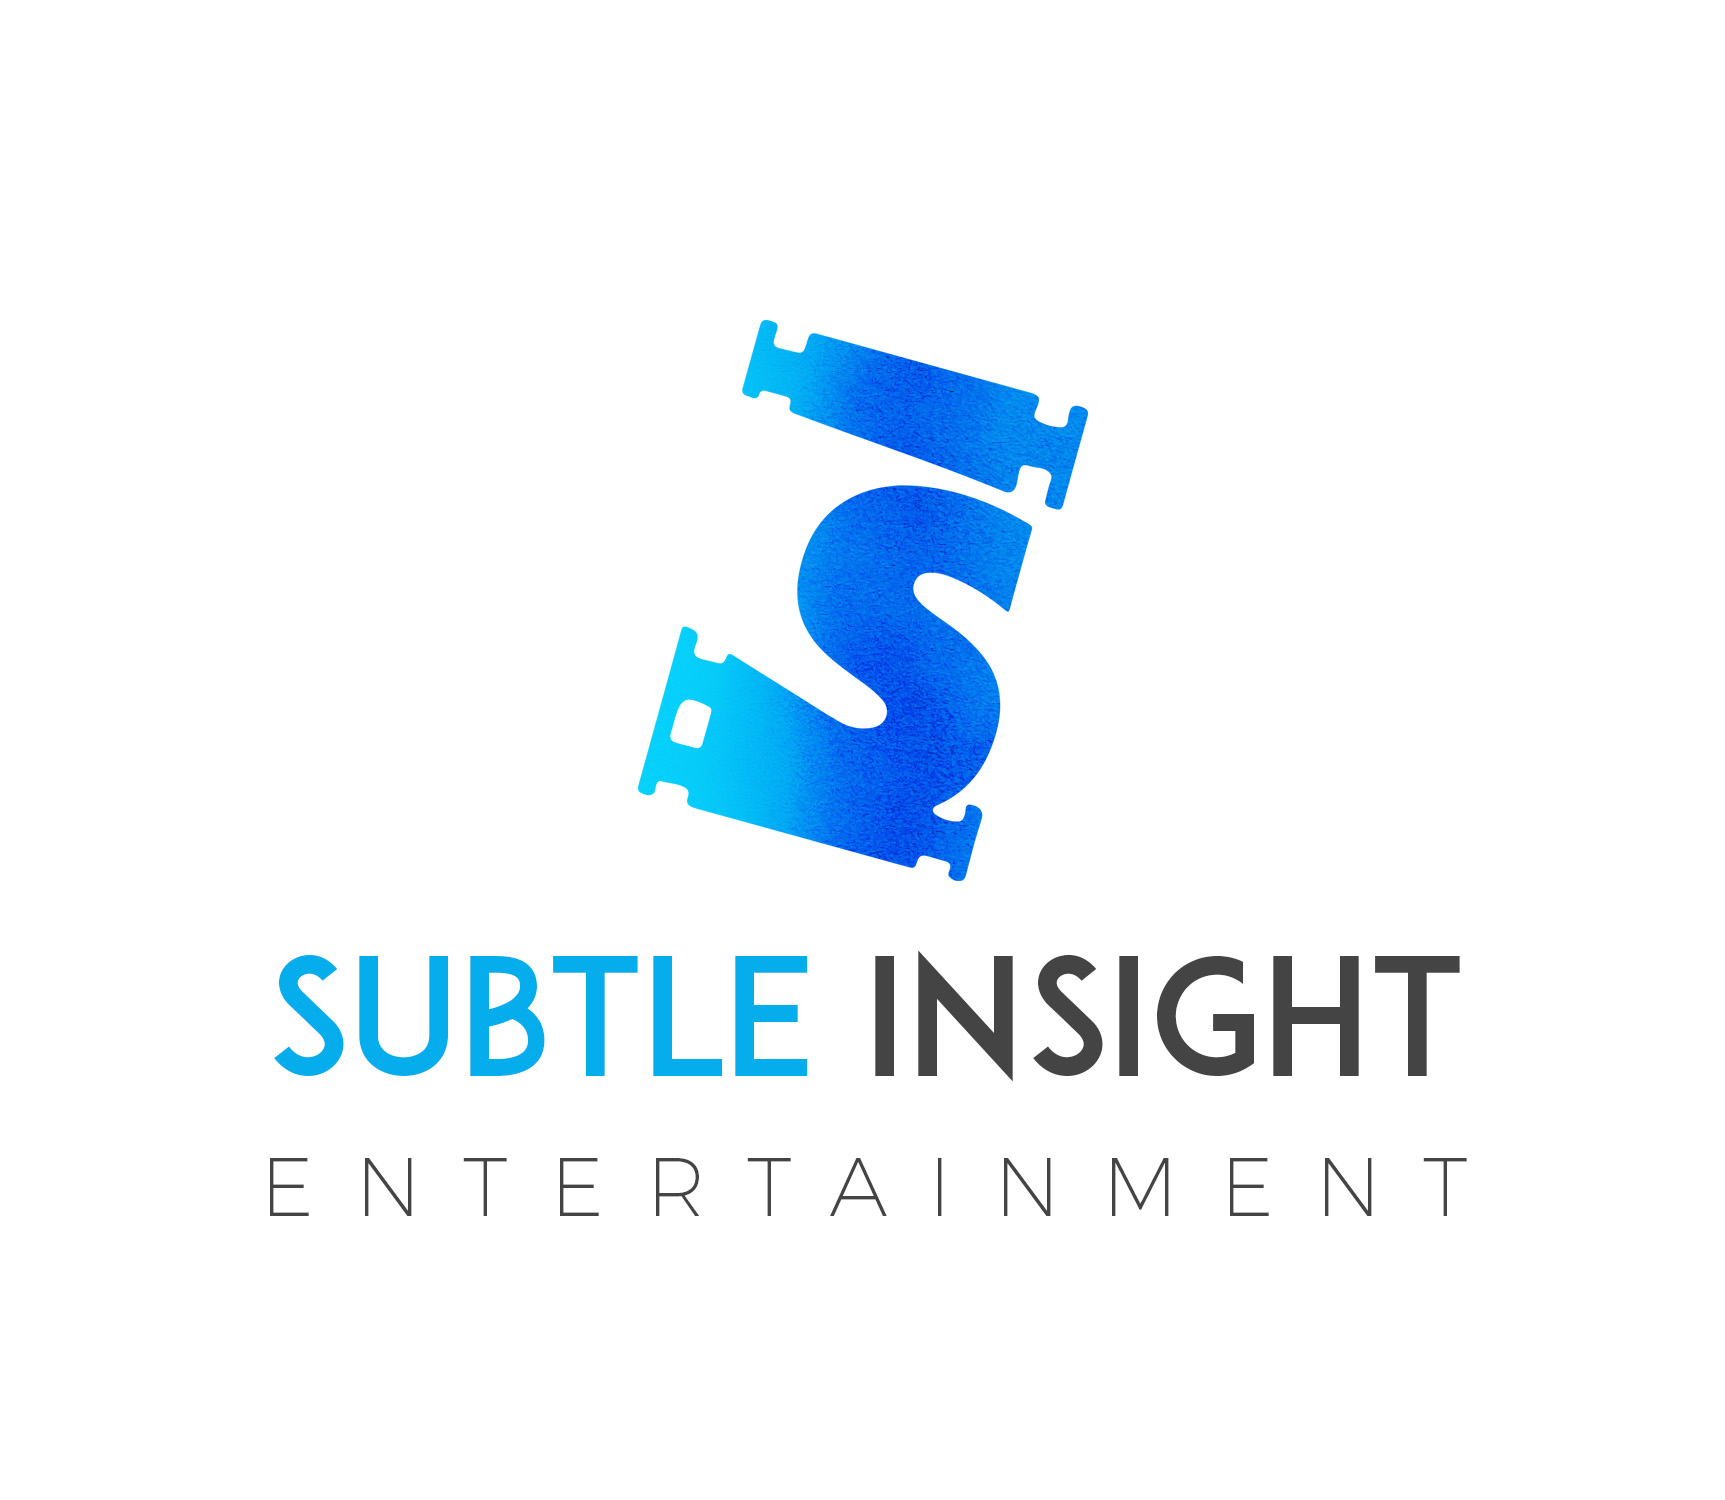 Entertainment Production Company Focuses On Talent From The Inland Empire